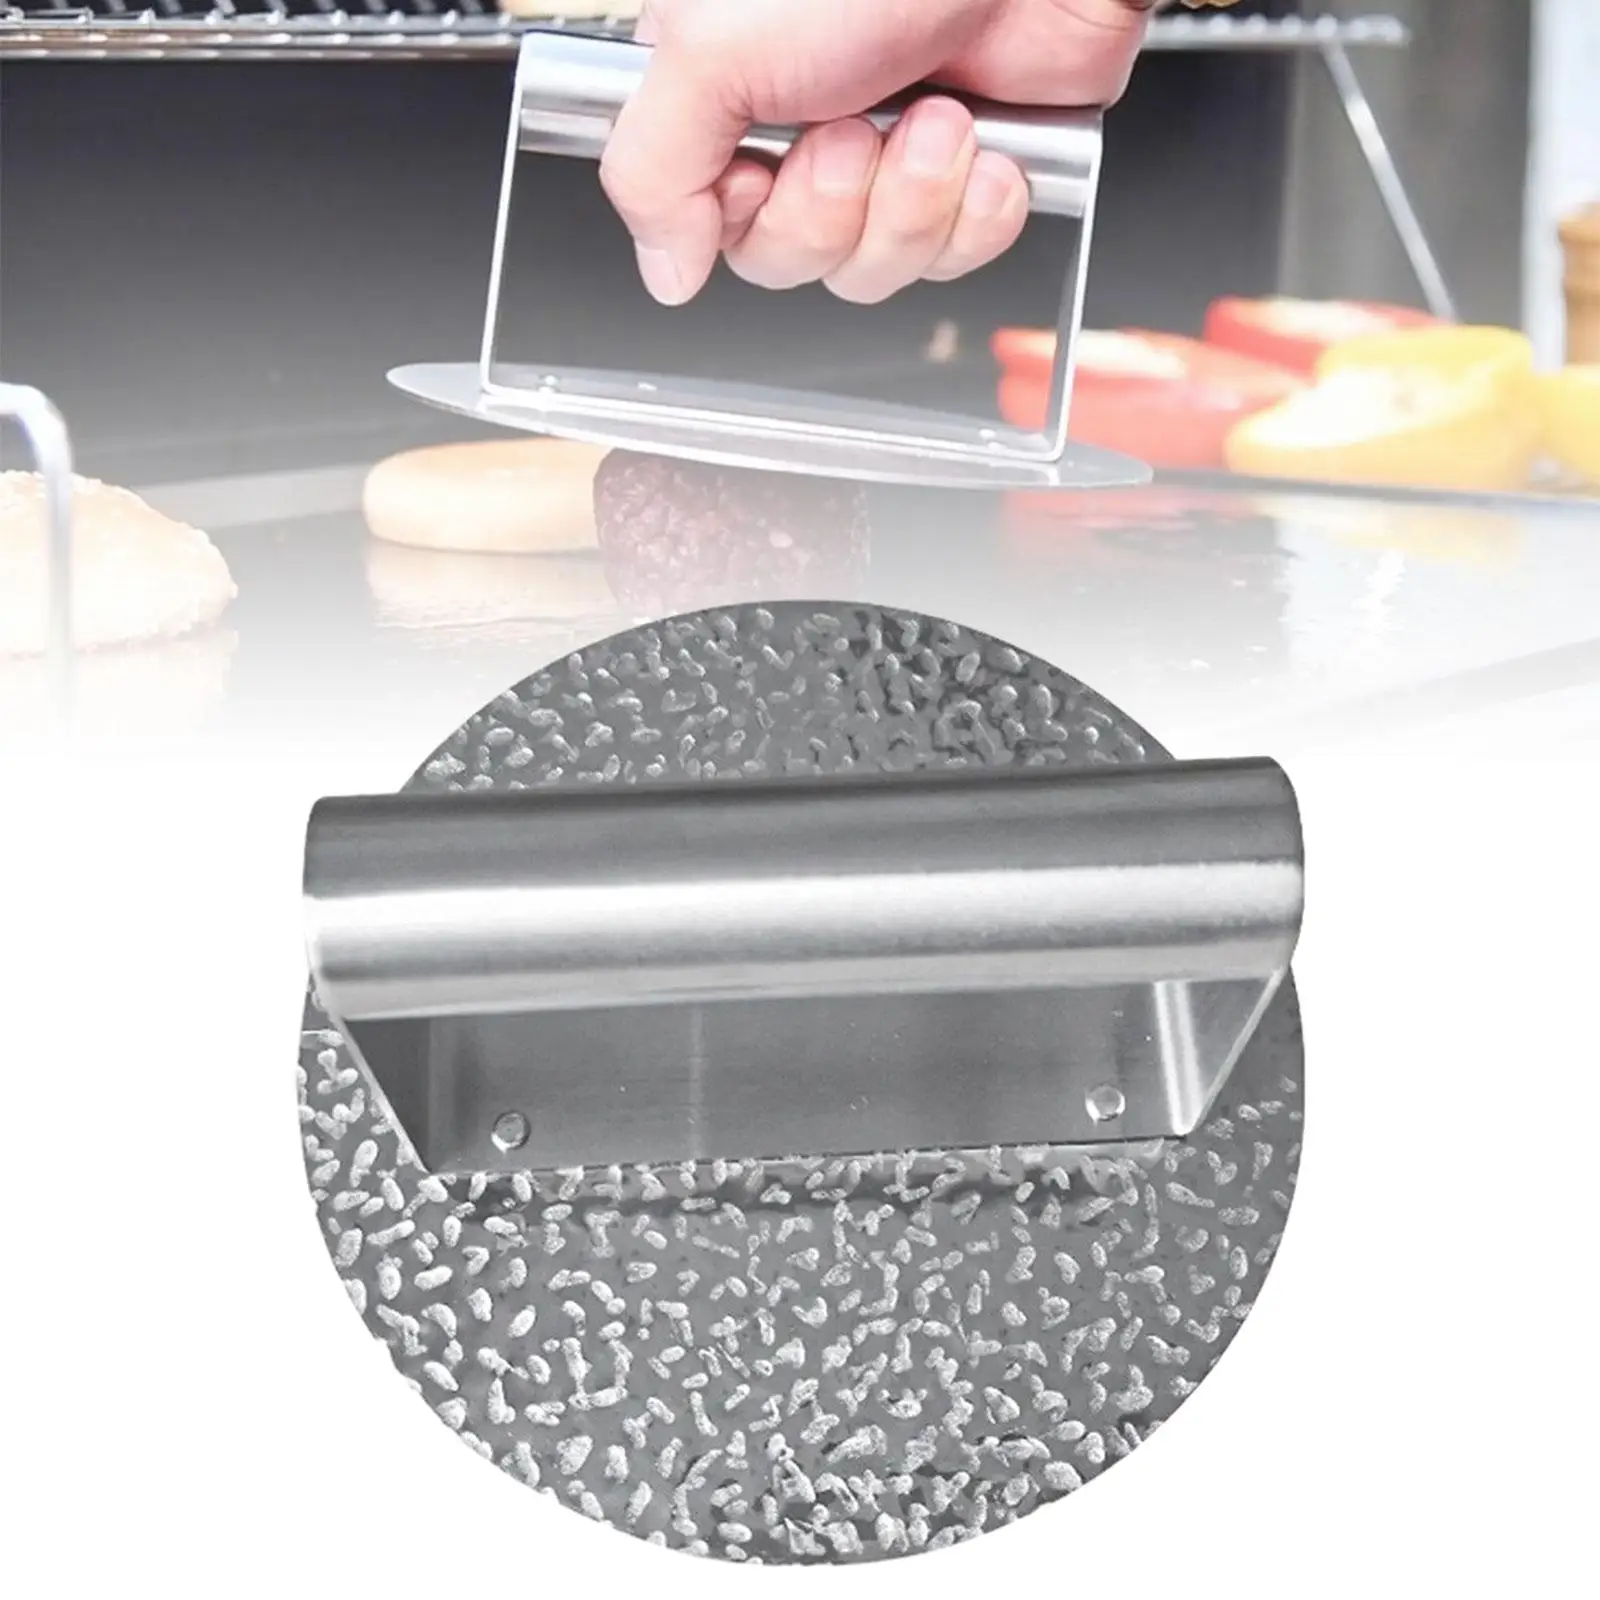 Stainless Steel Burger Press Griddle Accessories Professional Kitchen Gadgets Patty Maker for Flatbreads Paninis Cooking Steak